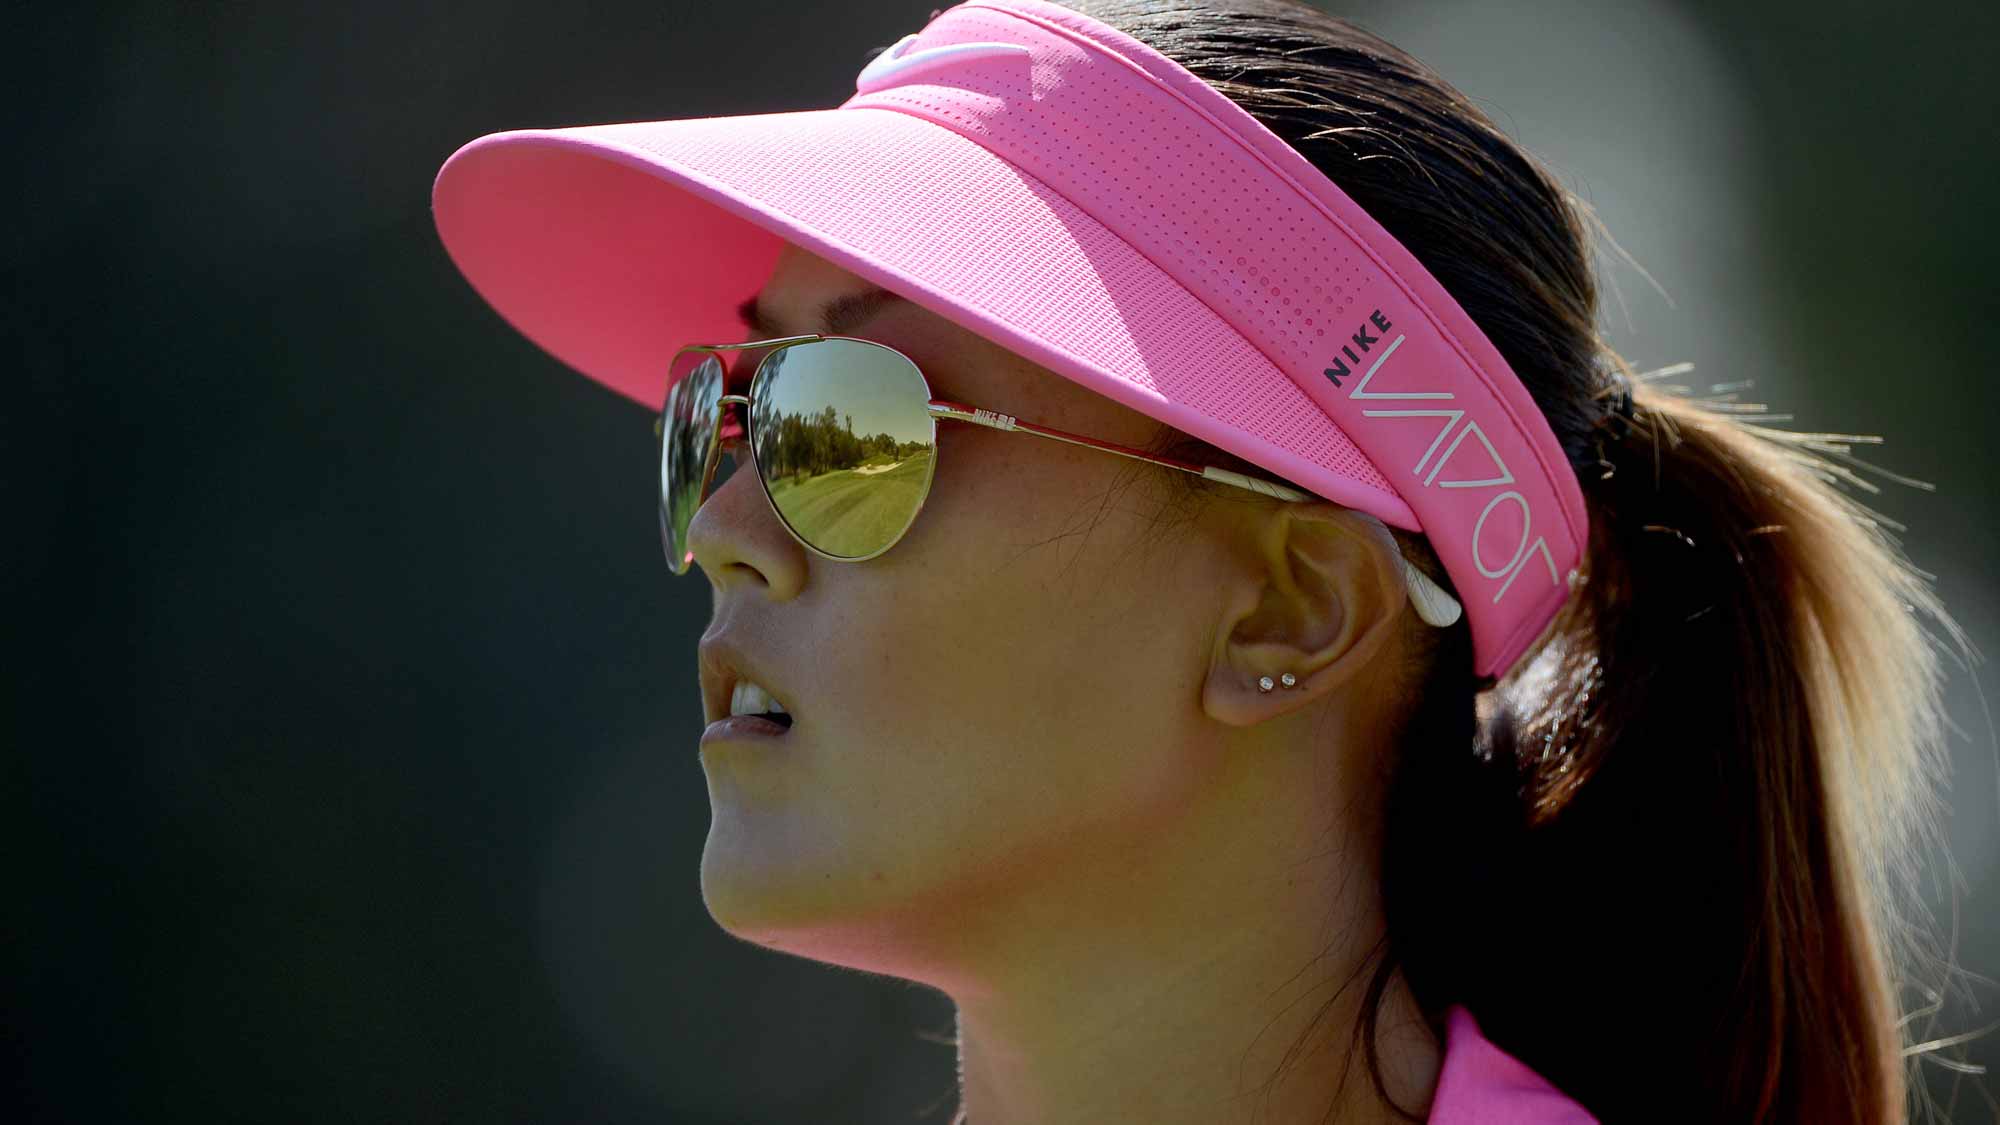 Michelle Wie looks on on the 10th fairway during Final Round of the LPGA KIA Classic at the Aviara Golf Club